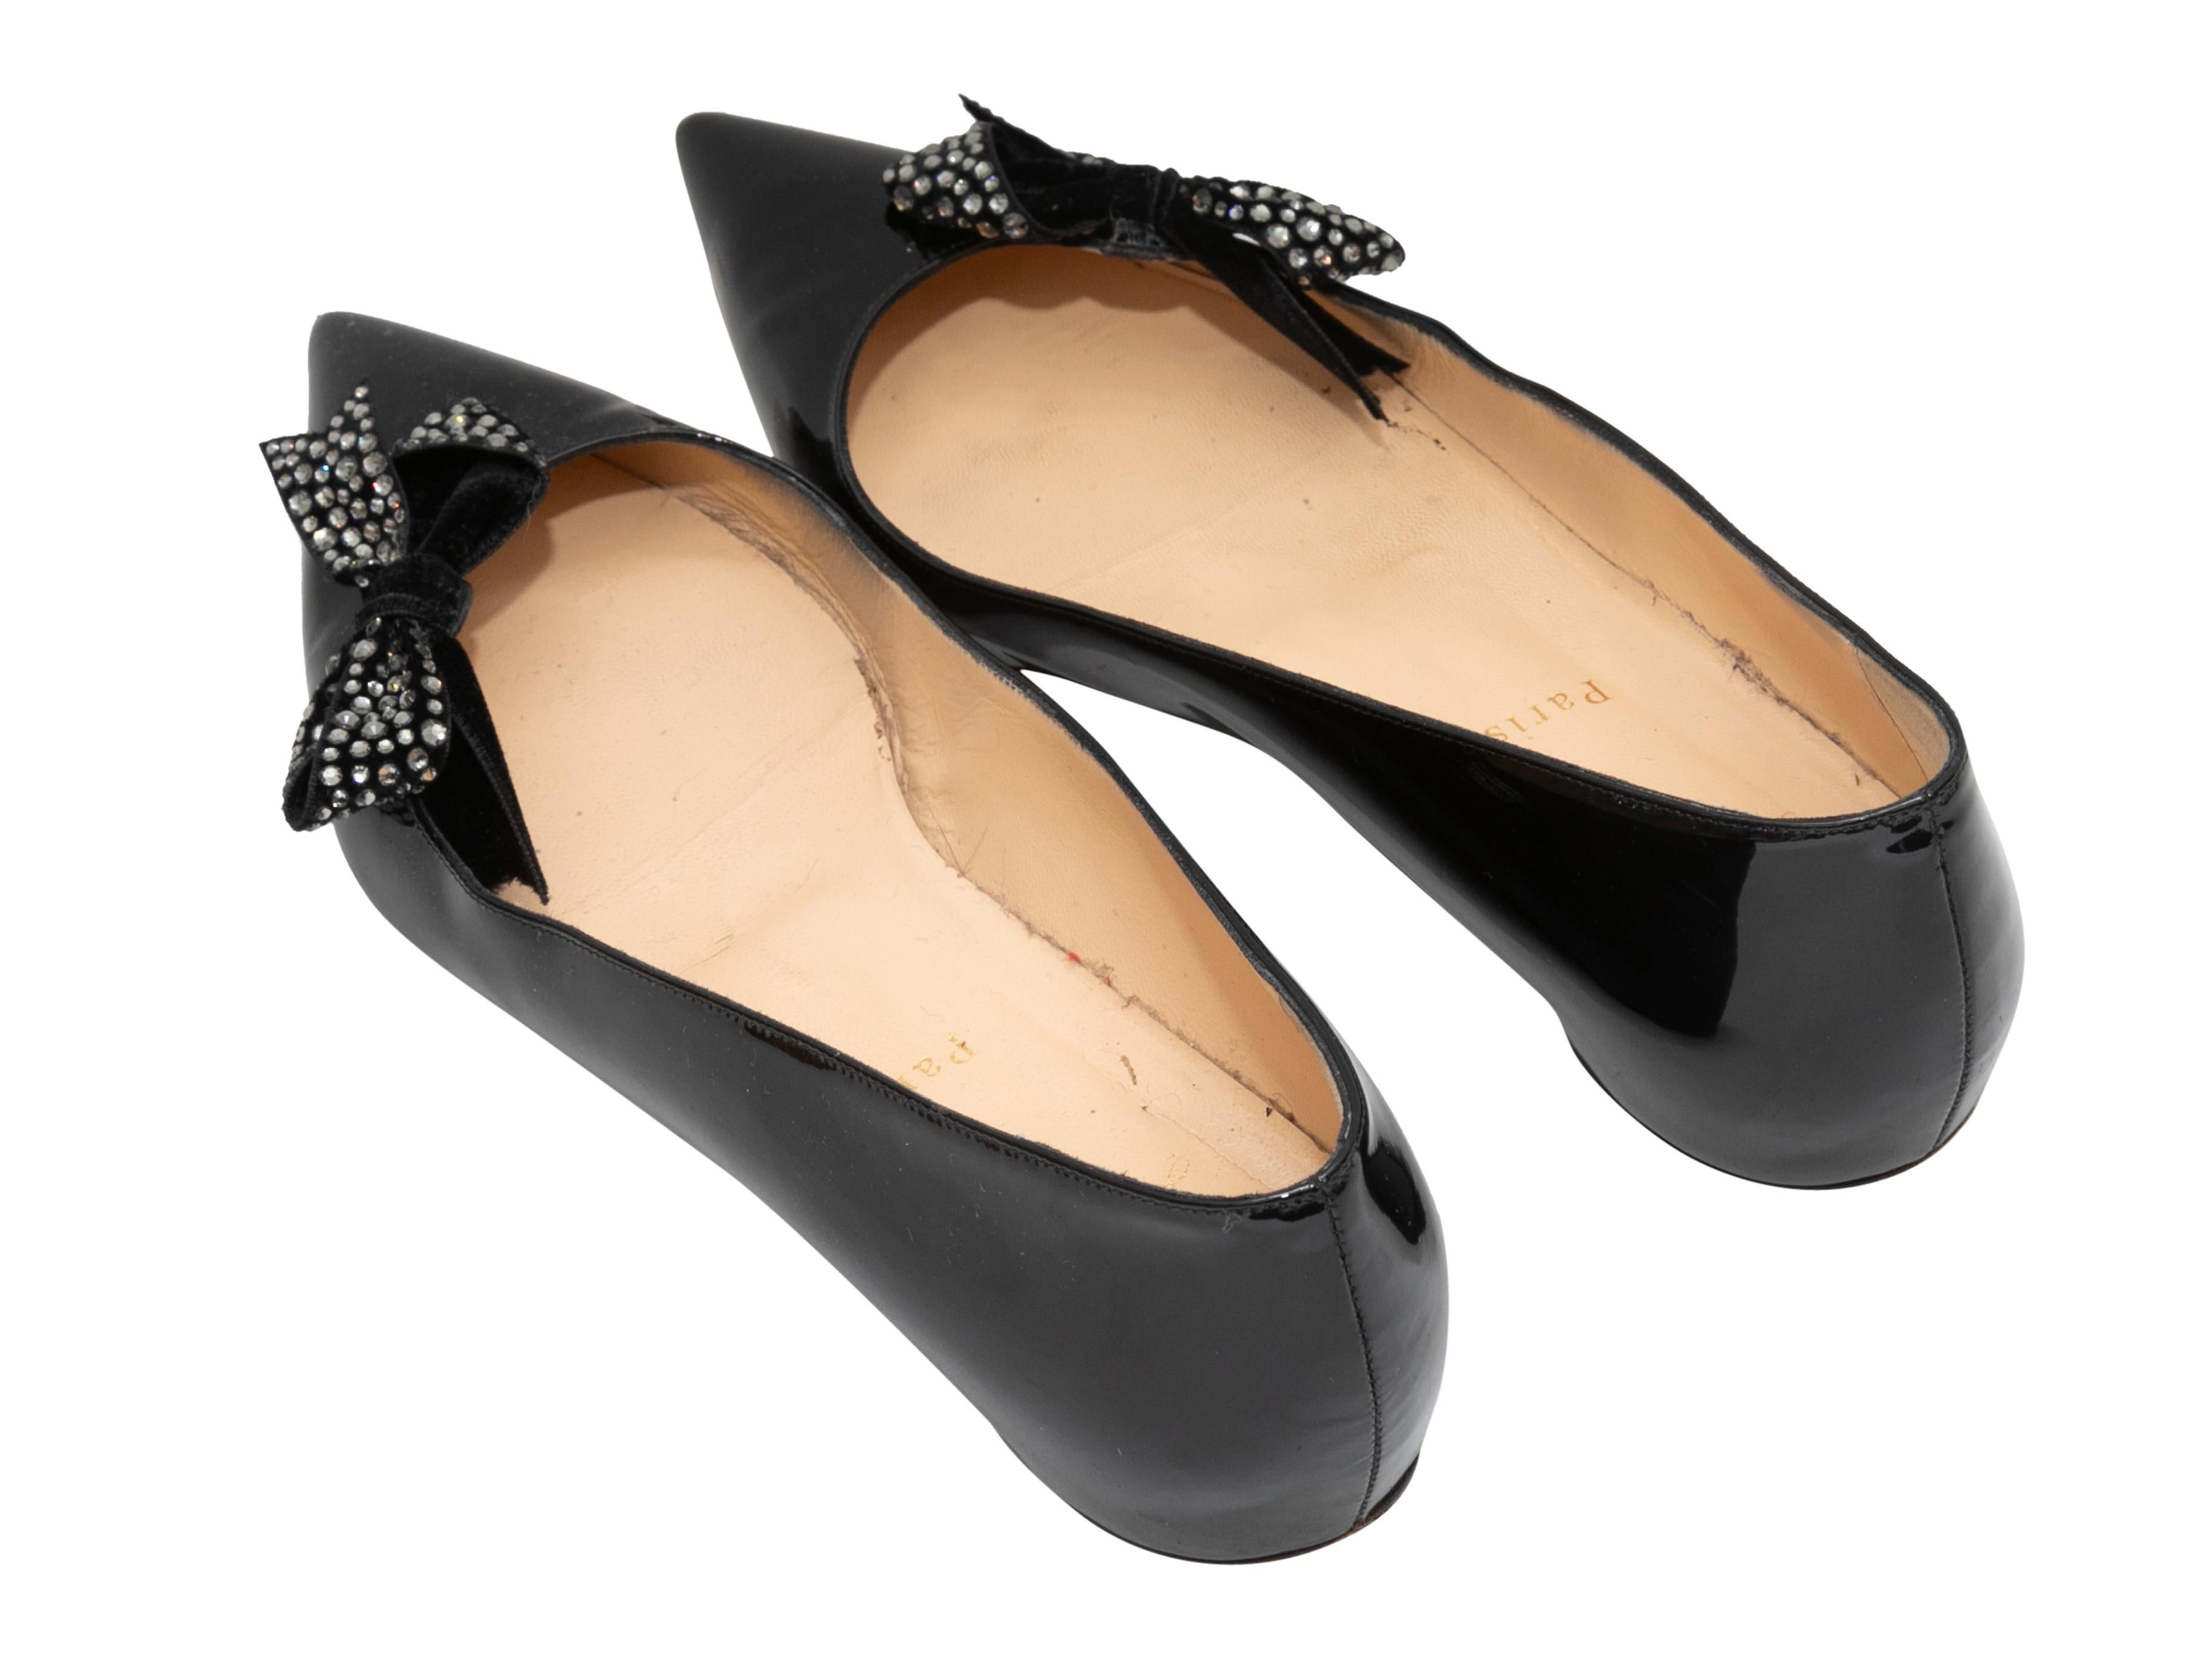 Black Christian Louboutin Patent Crystal Bow-Accented Flats Size 39.5 In Good Condition For Sale In New York, NY